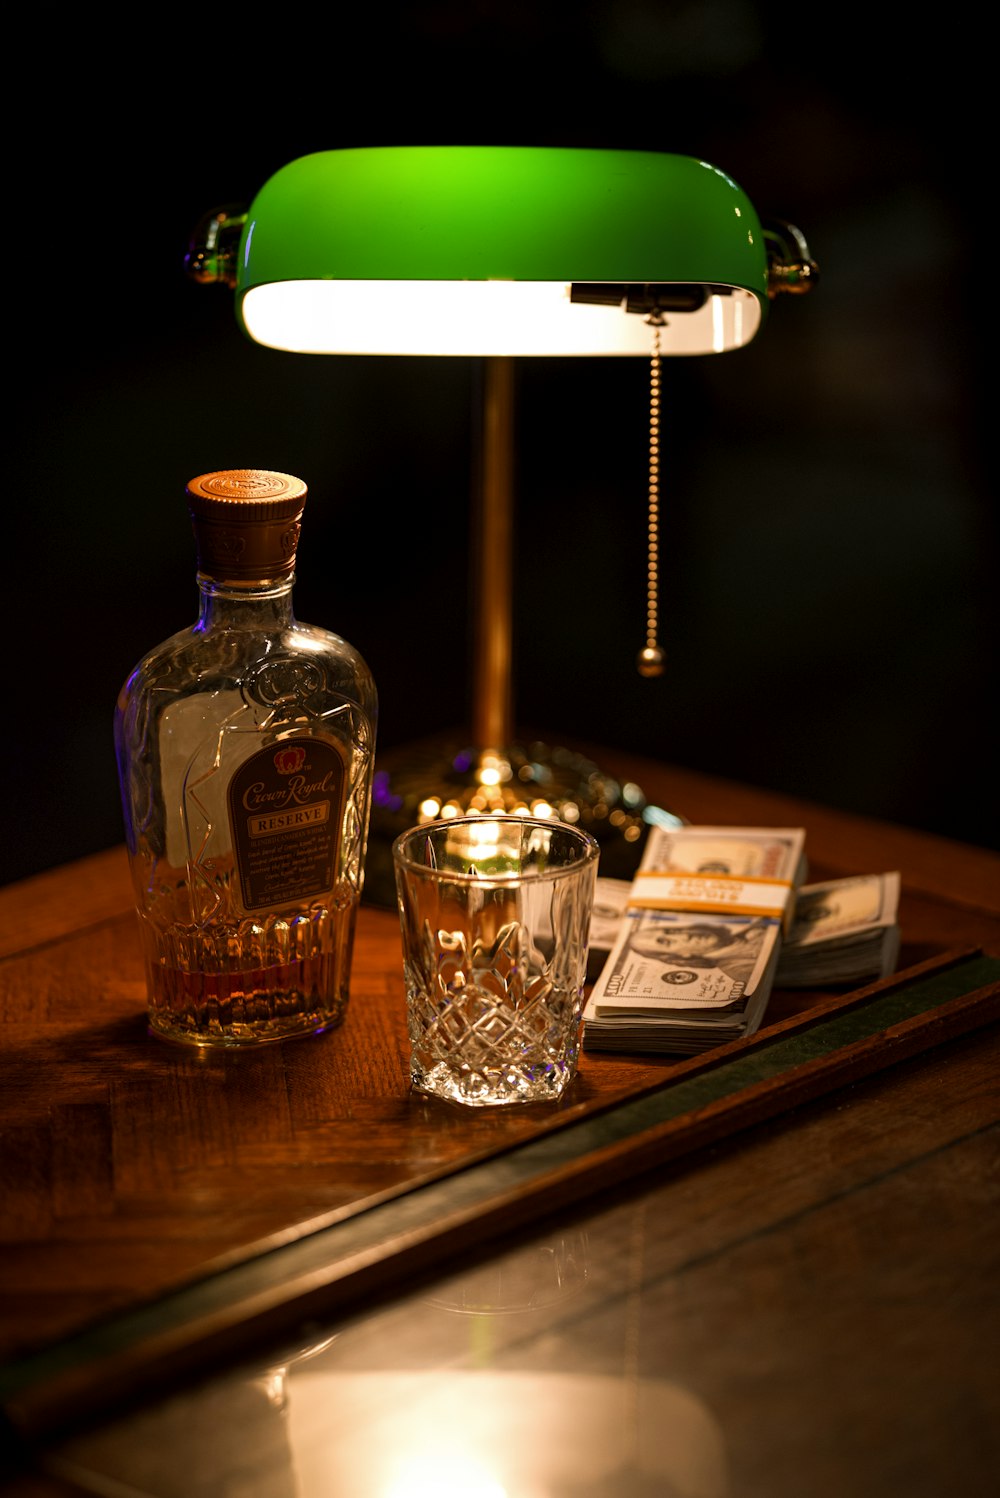 decanter by empty drinking glass cup by turned-on banker's lamp